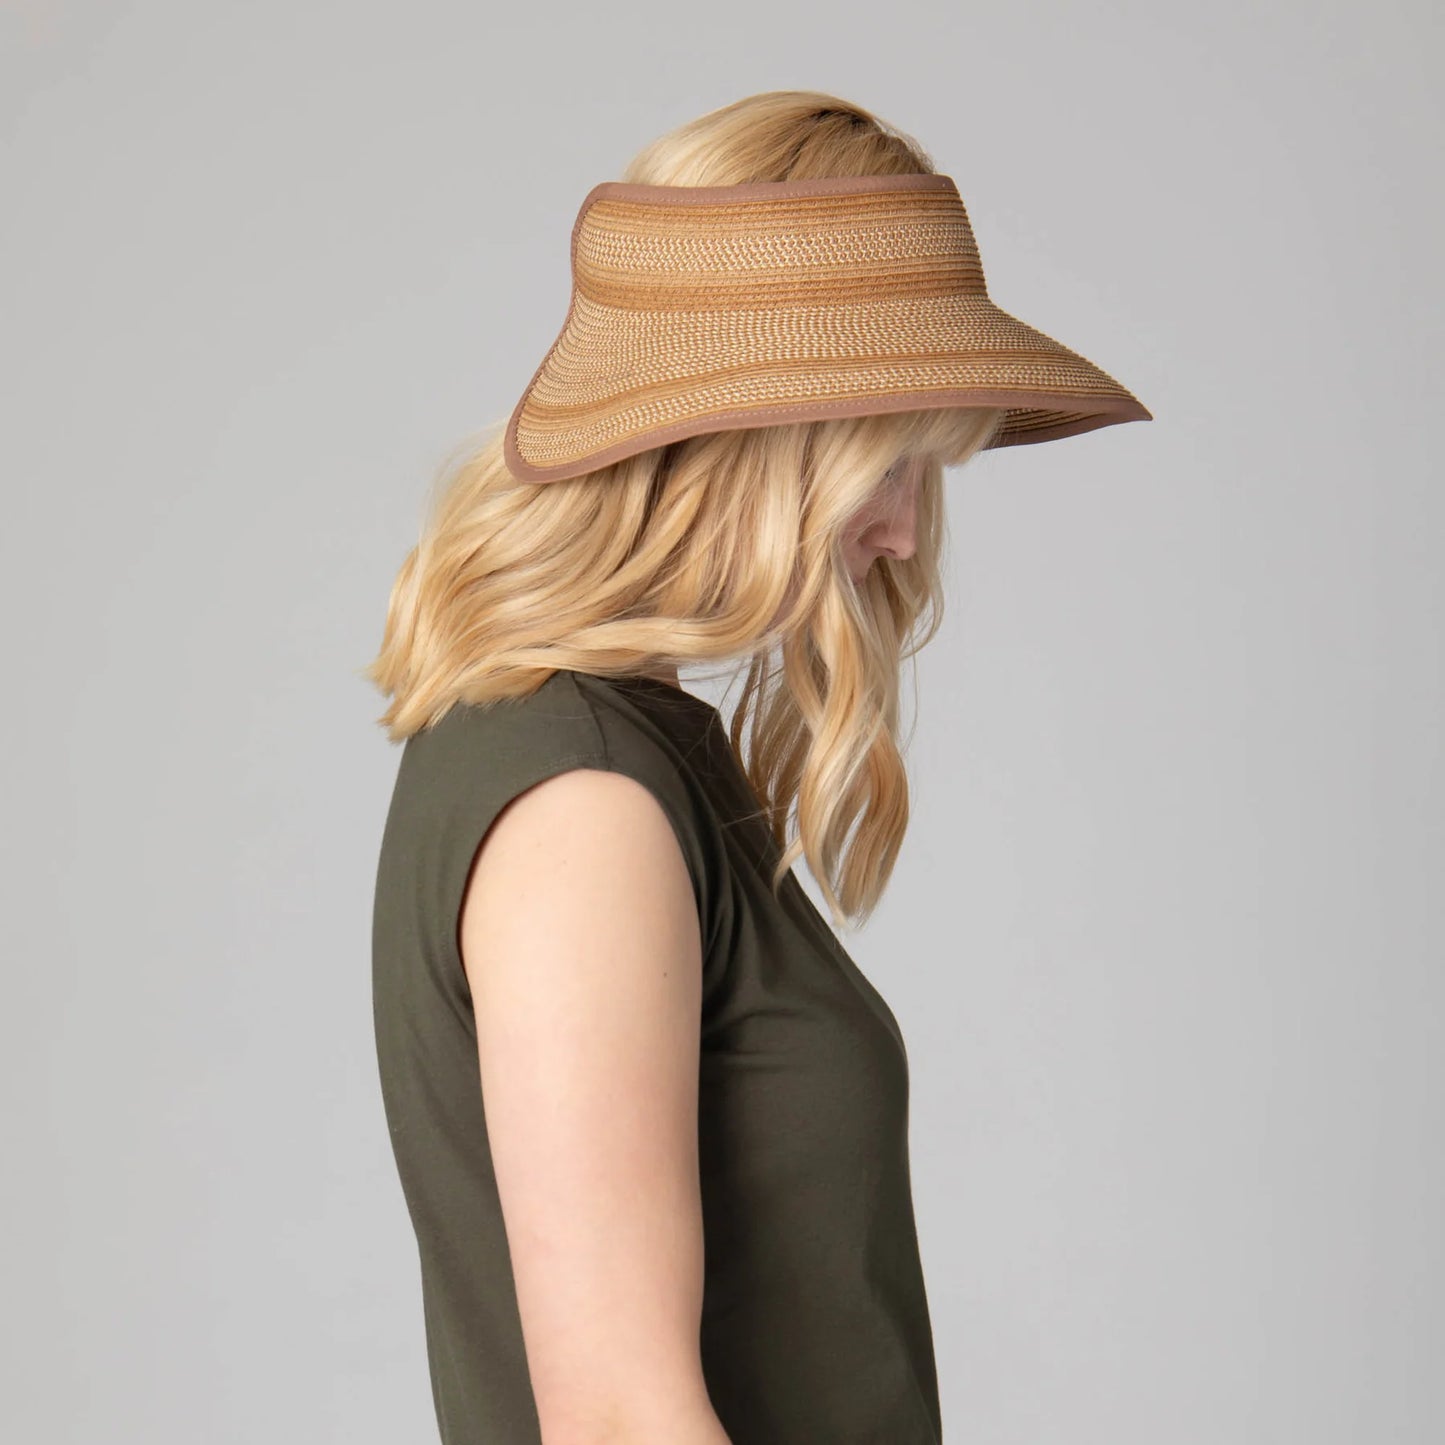 Women's Neutral Colored Ultrabraided Large Brim Packable Visor